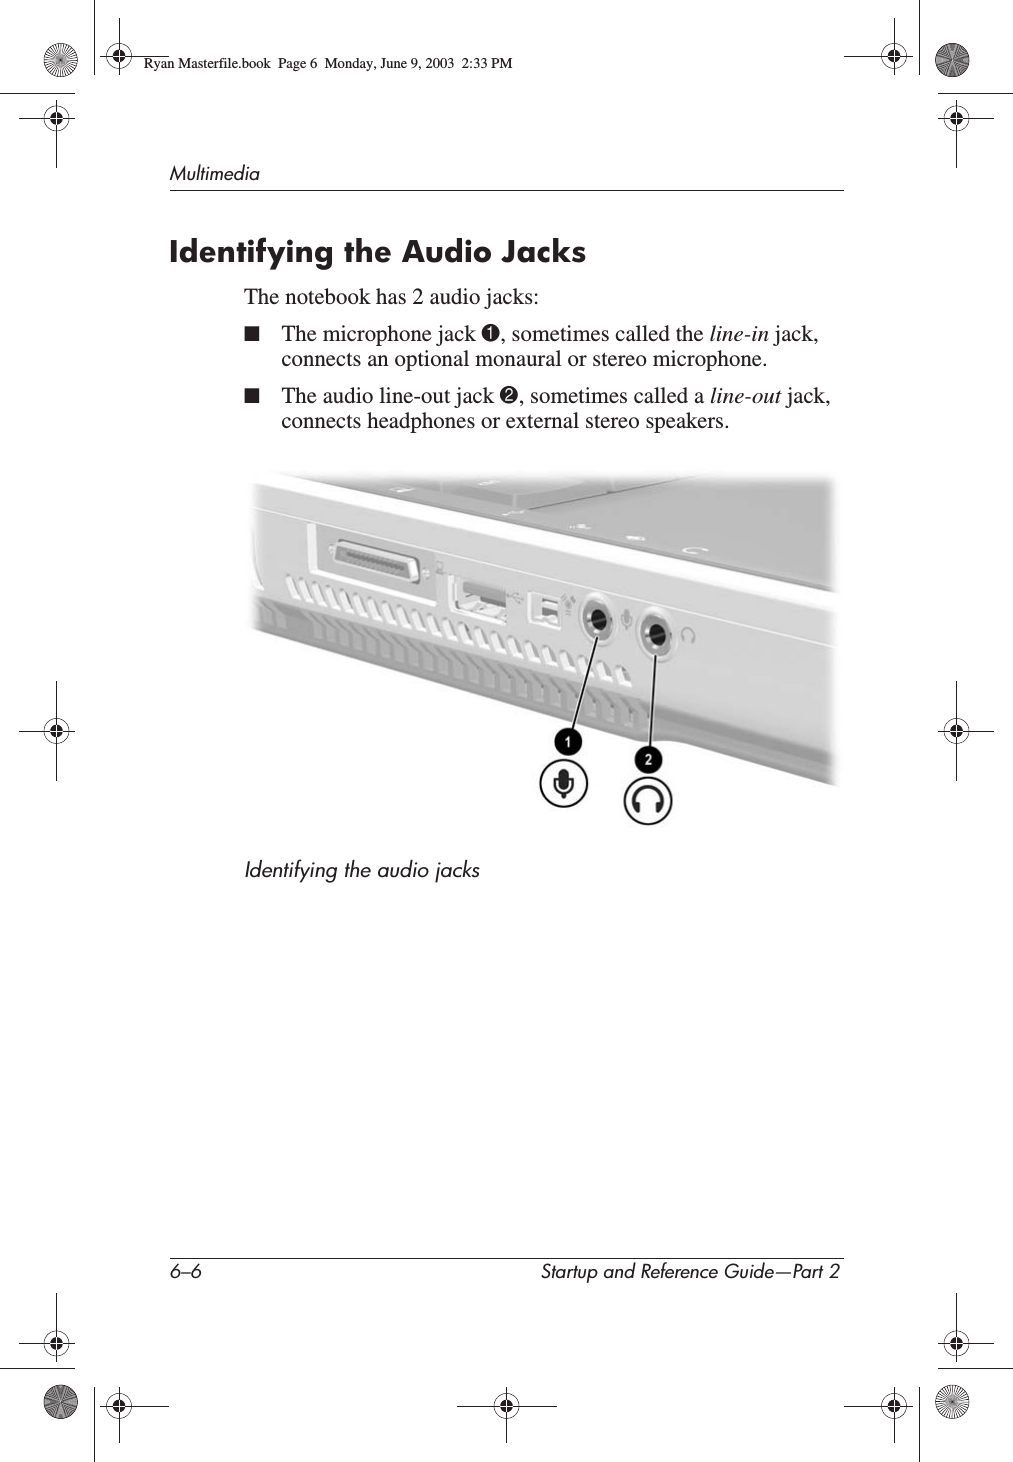 6–6 Startup and Reference Guide—Part 2MultimediaIdentifying the Audio JacksThe notebook has 2 audio jacks:■The microphone jack 1, sometimes called the line-in jack, connects an optional monaural or stereo microphone. ■The audio line-out jack 2, sometimes called a line-out jack,connects headphones or external stereo speakers. Identifying the audio jacksRyan Masterfile.book  Page 6  Monday, June 9, 2003  2:33 PM